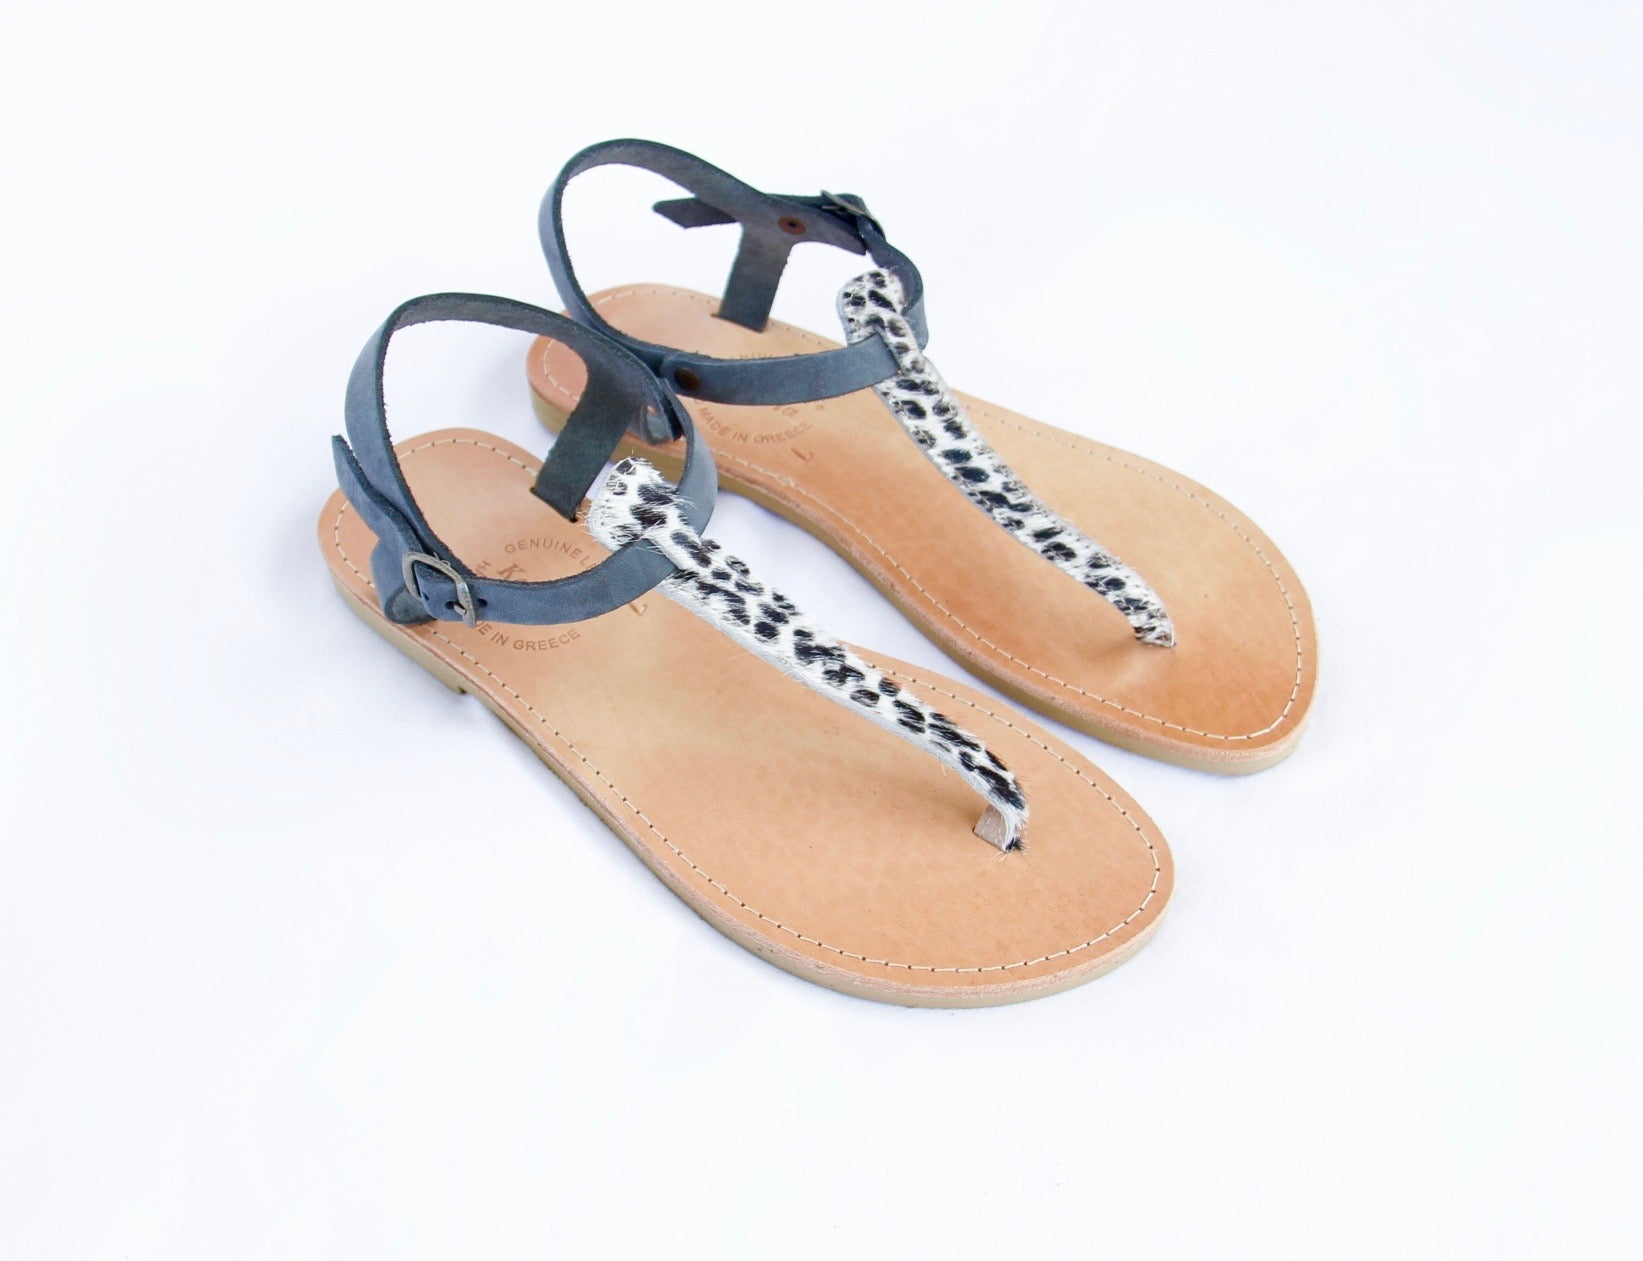 Zenais Sandals in Animal Print and Soft Grey Leather - Kardia